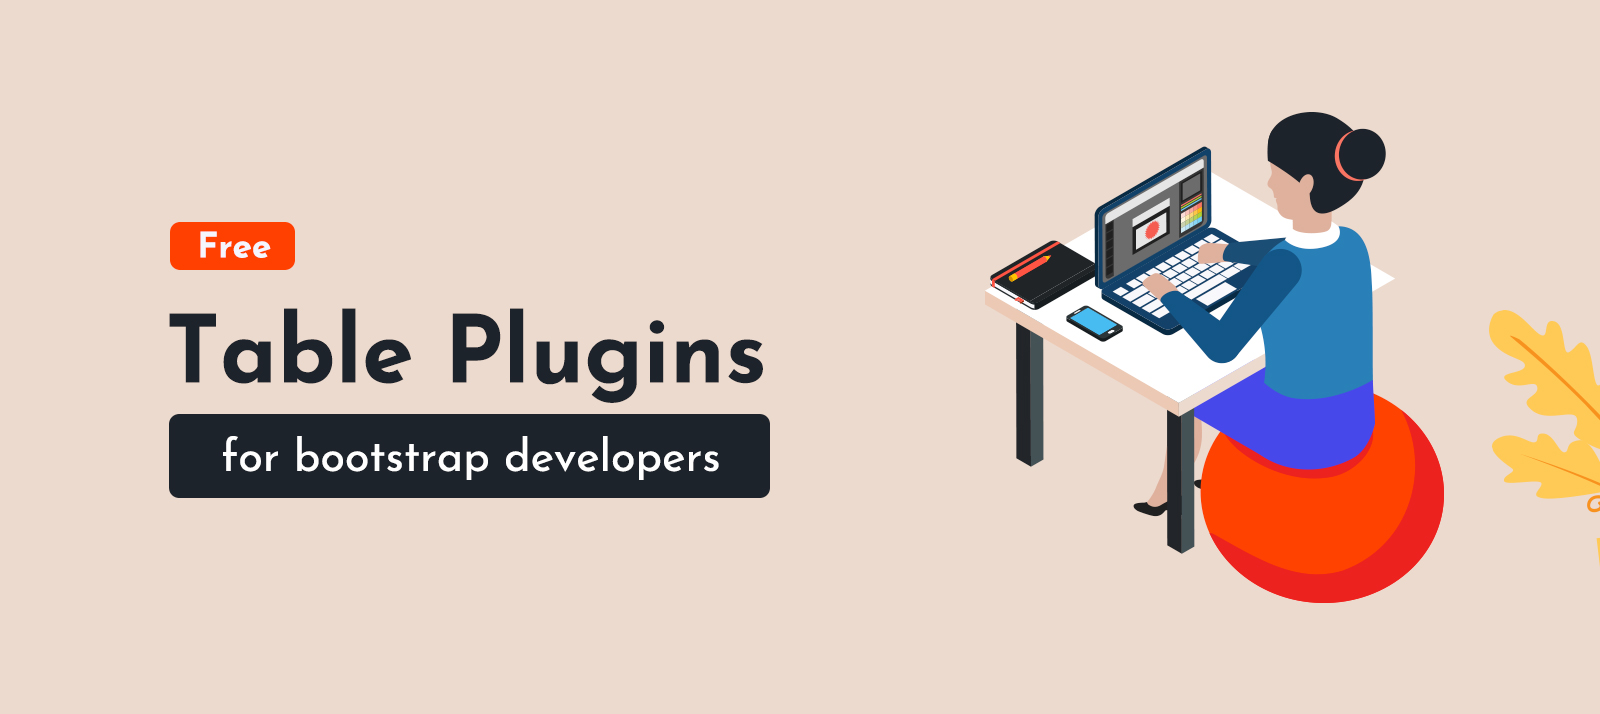  Best Free Table Plugins for Bootstrap Developers